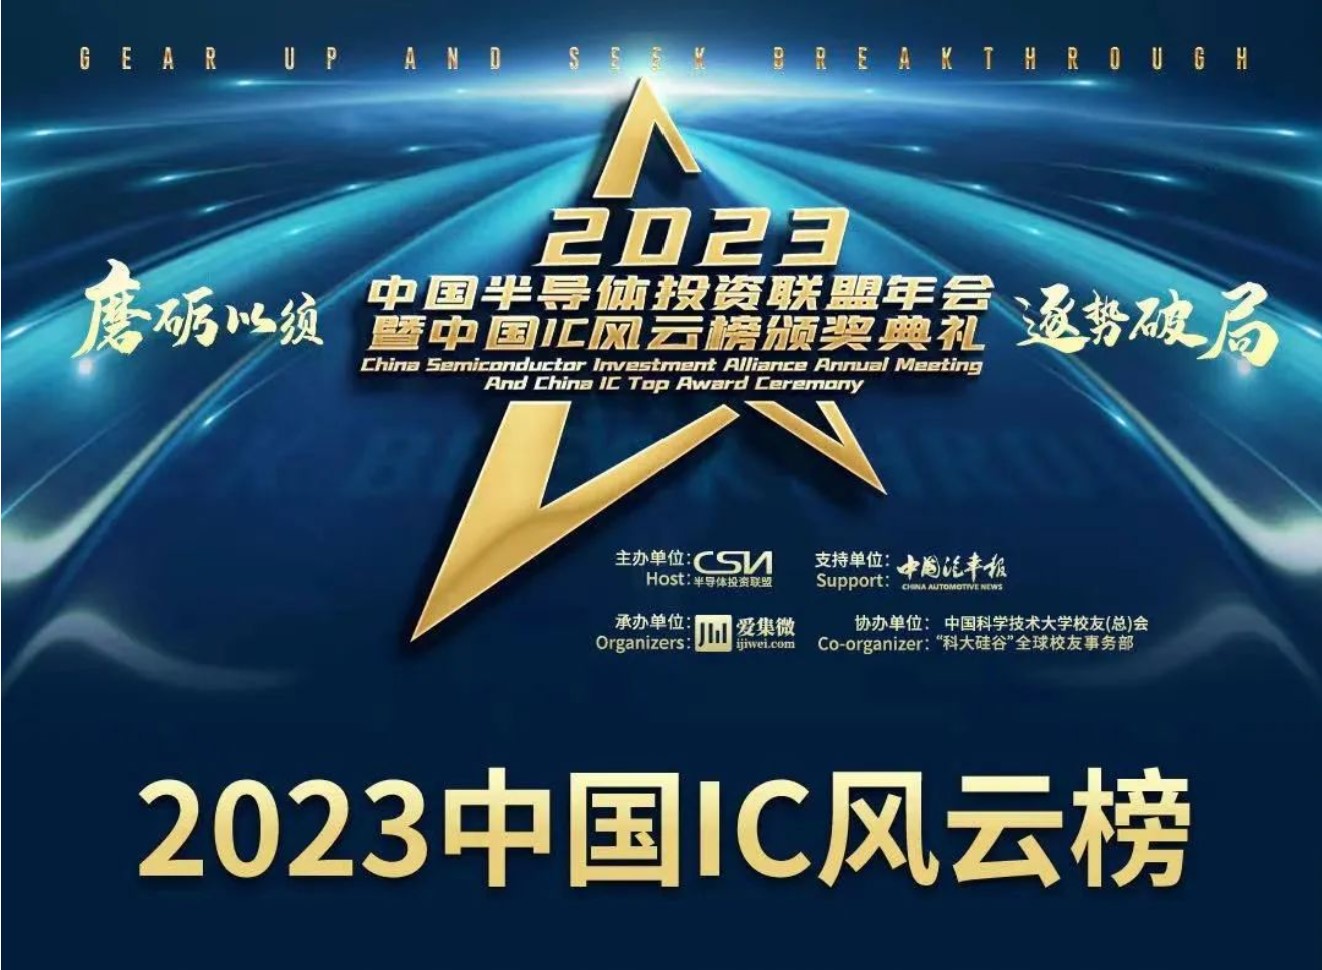 CTC Capital honored ” Top 20 VC in China 2022″ “Top 50 Investors in China 2022”